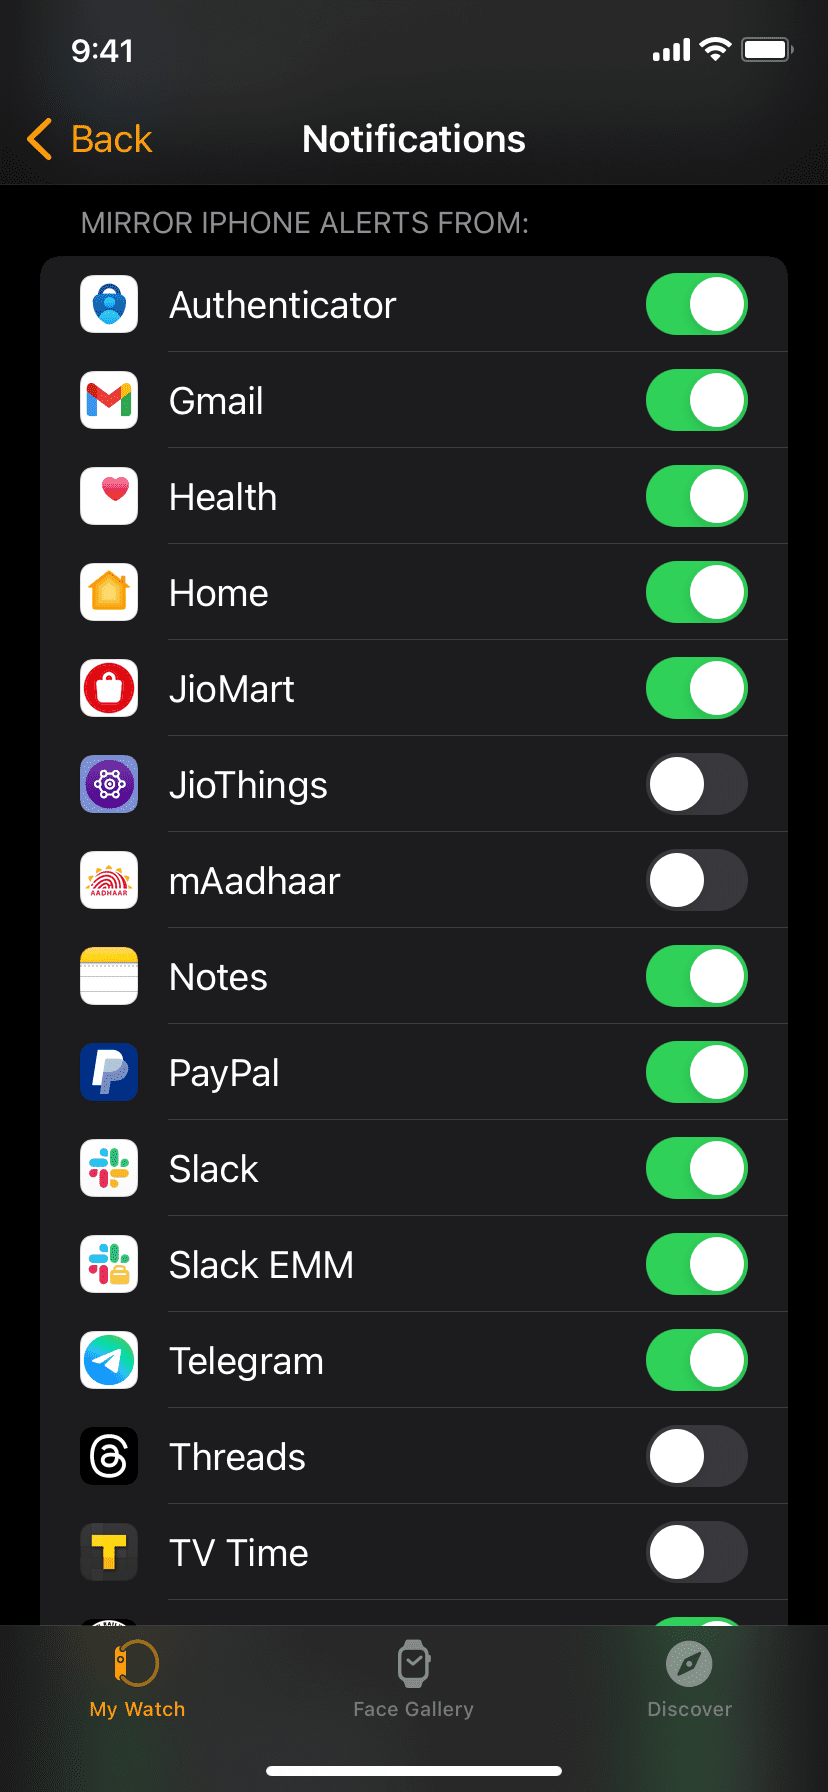 Third party apps in Notifications settings of Watch app